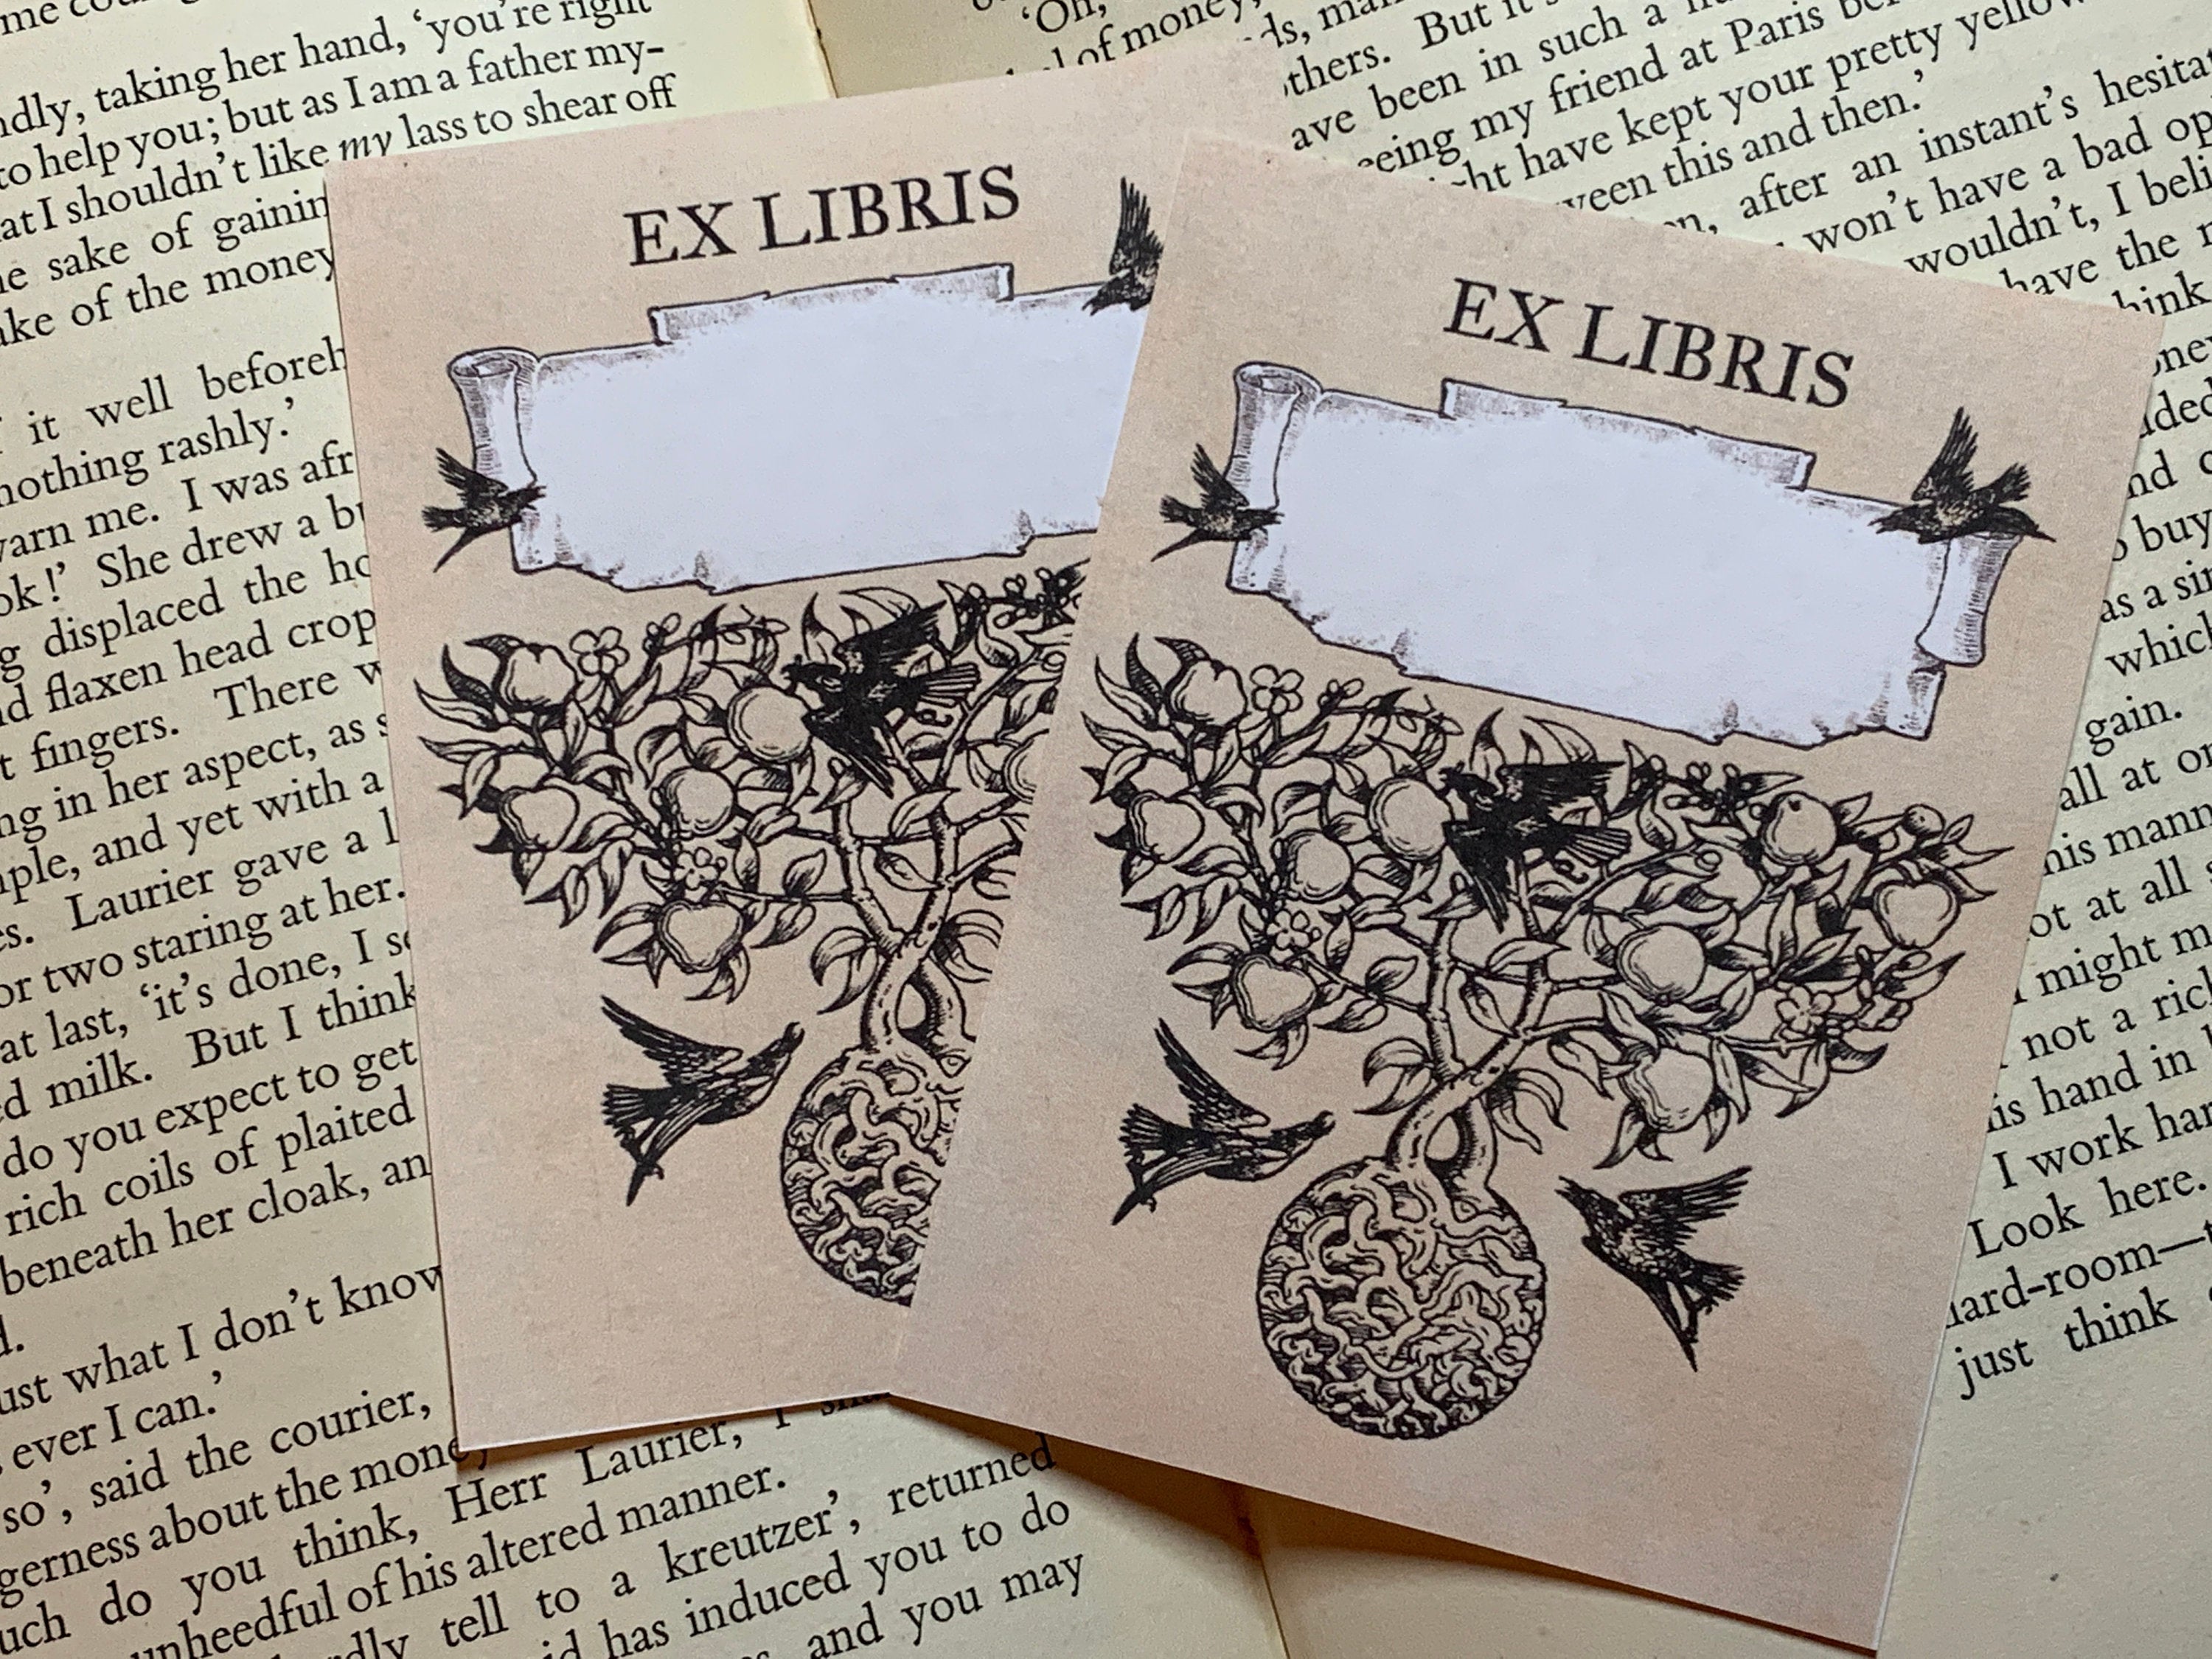 Grimm Crows, Personalized Ex-Libris Bookplates, Crafted on Traditional Gummed Paper, 3in x 4in, Set of 30